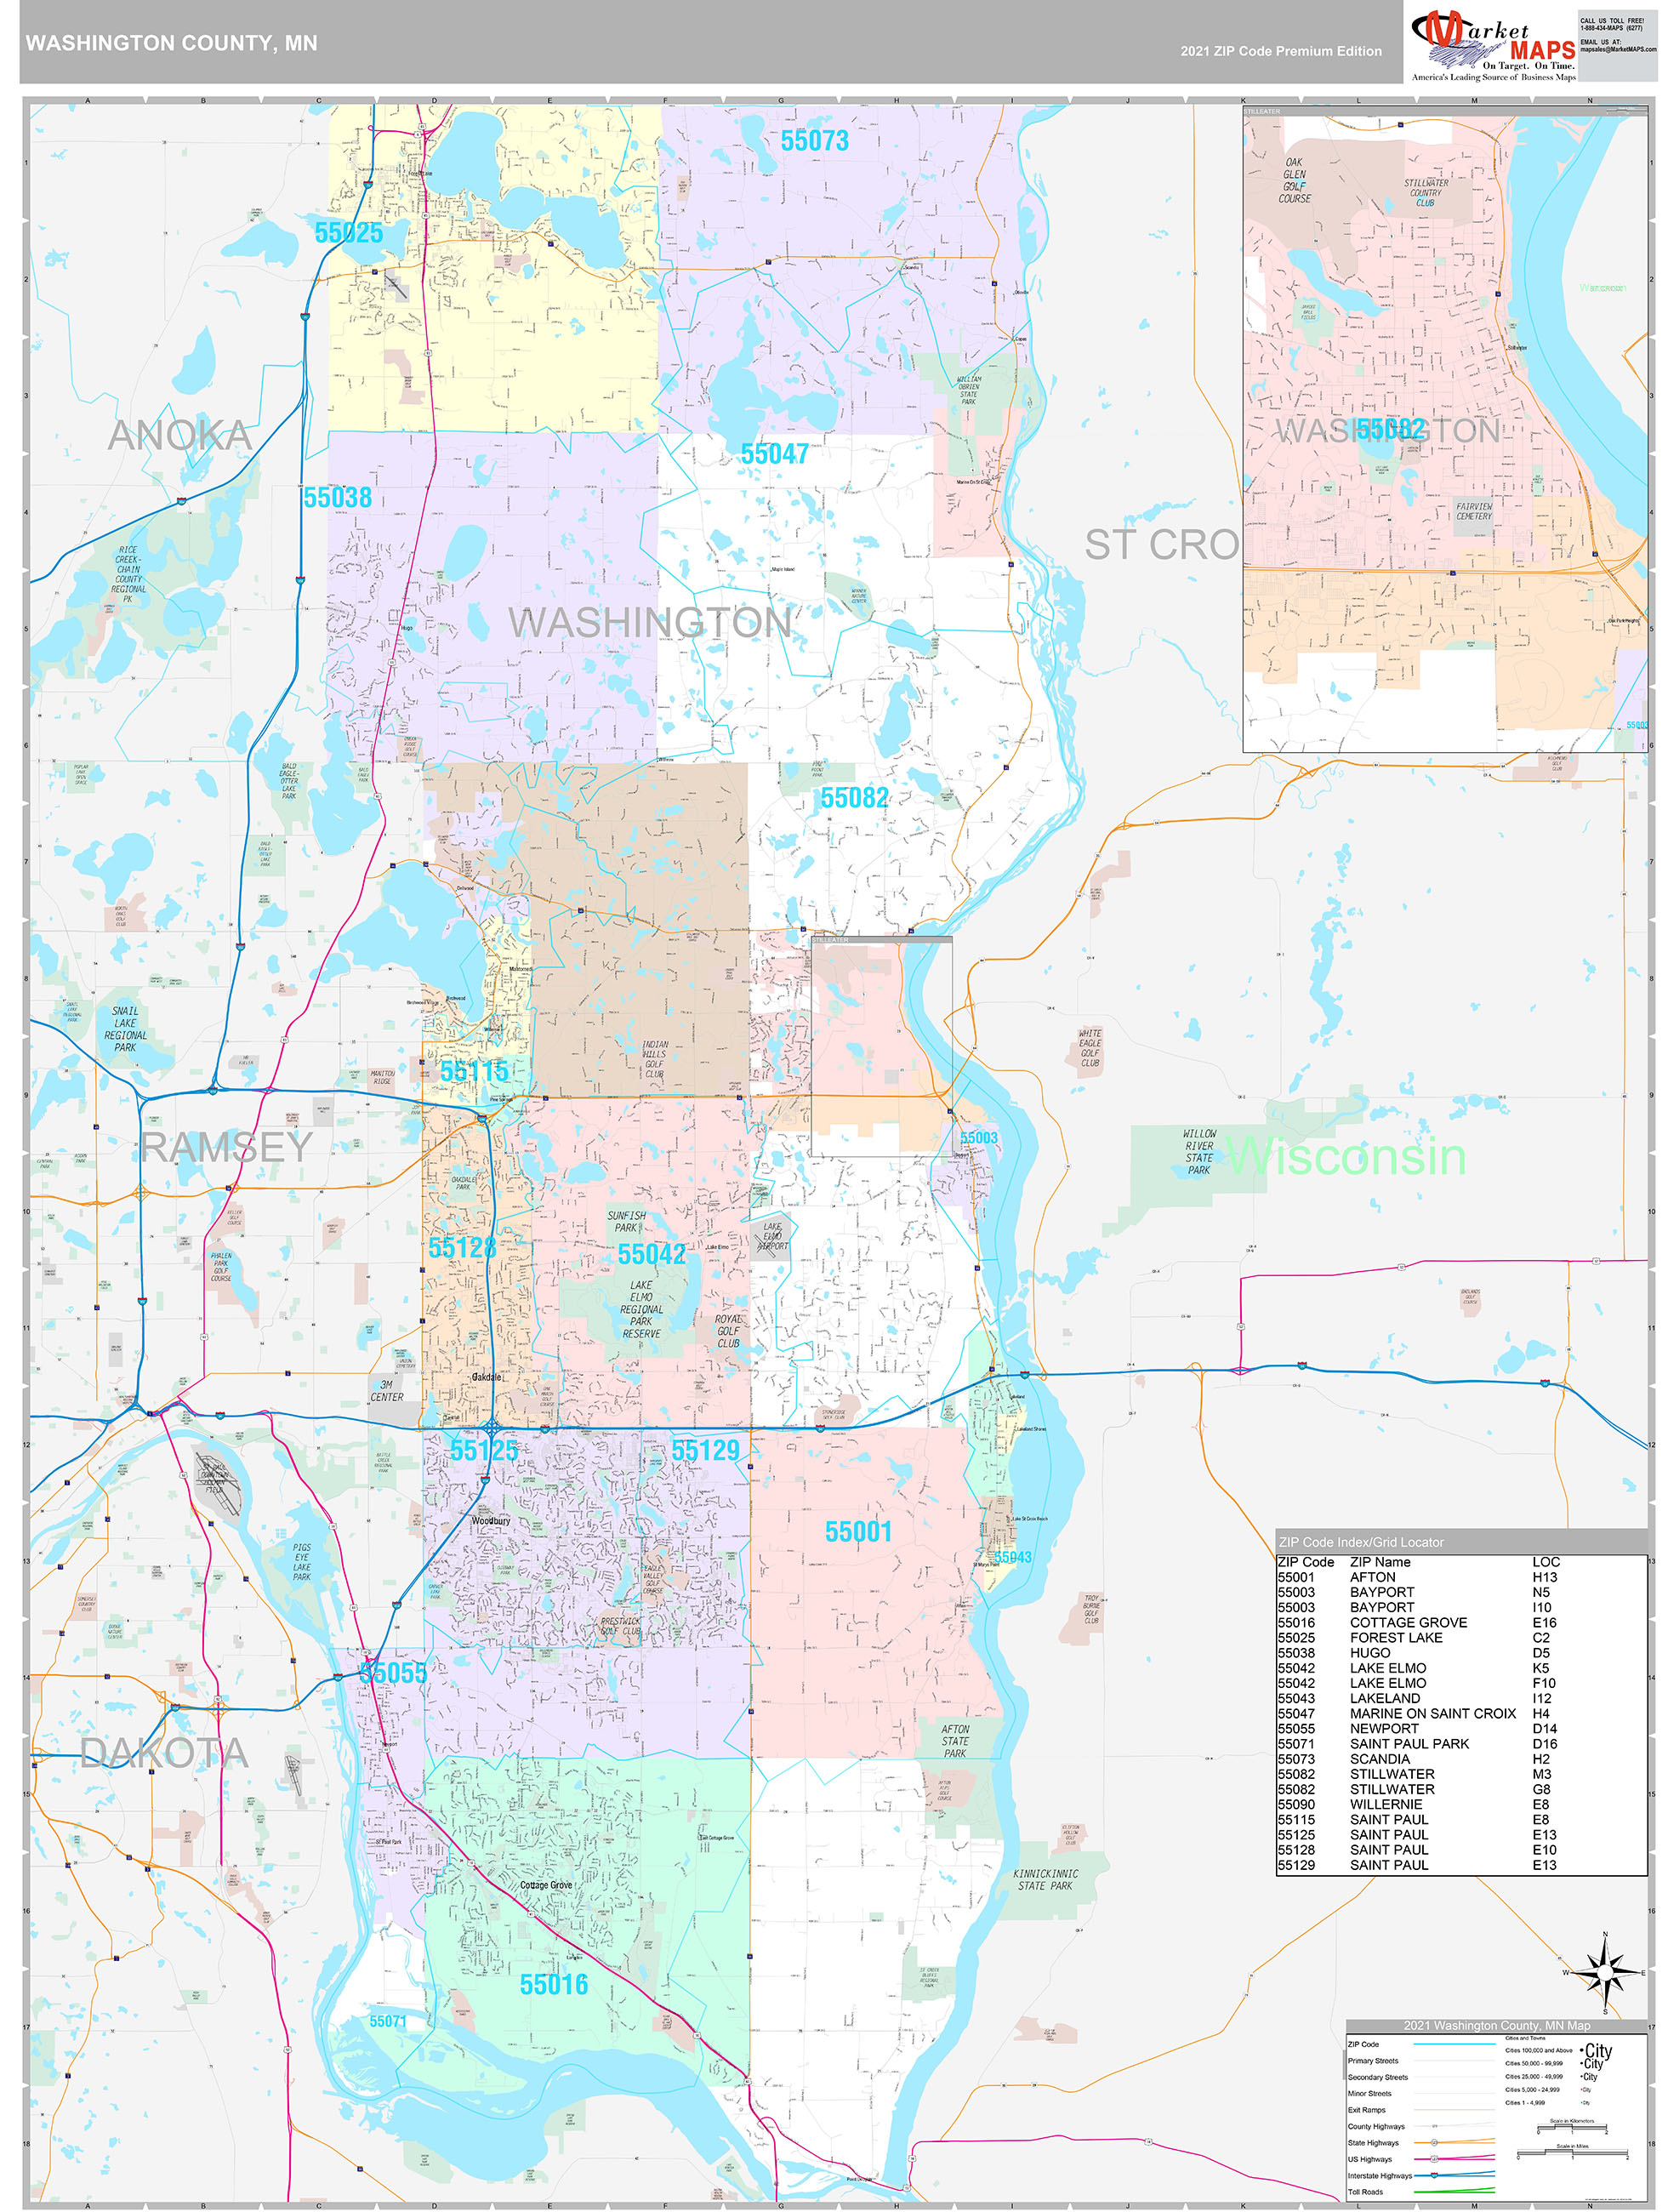 Washington County Mn Gis Map - London Top Attractions Map